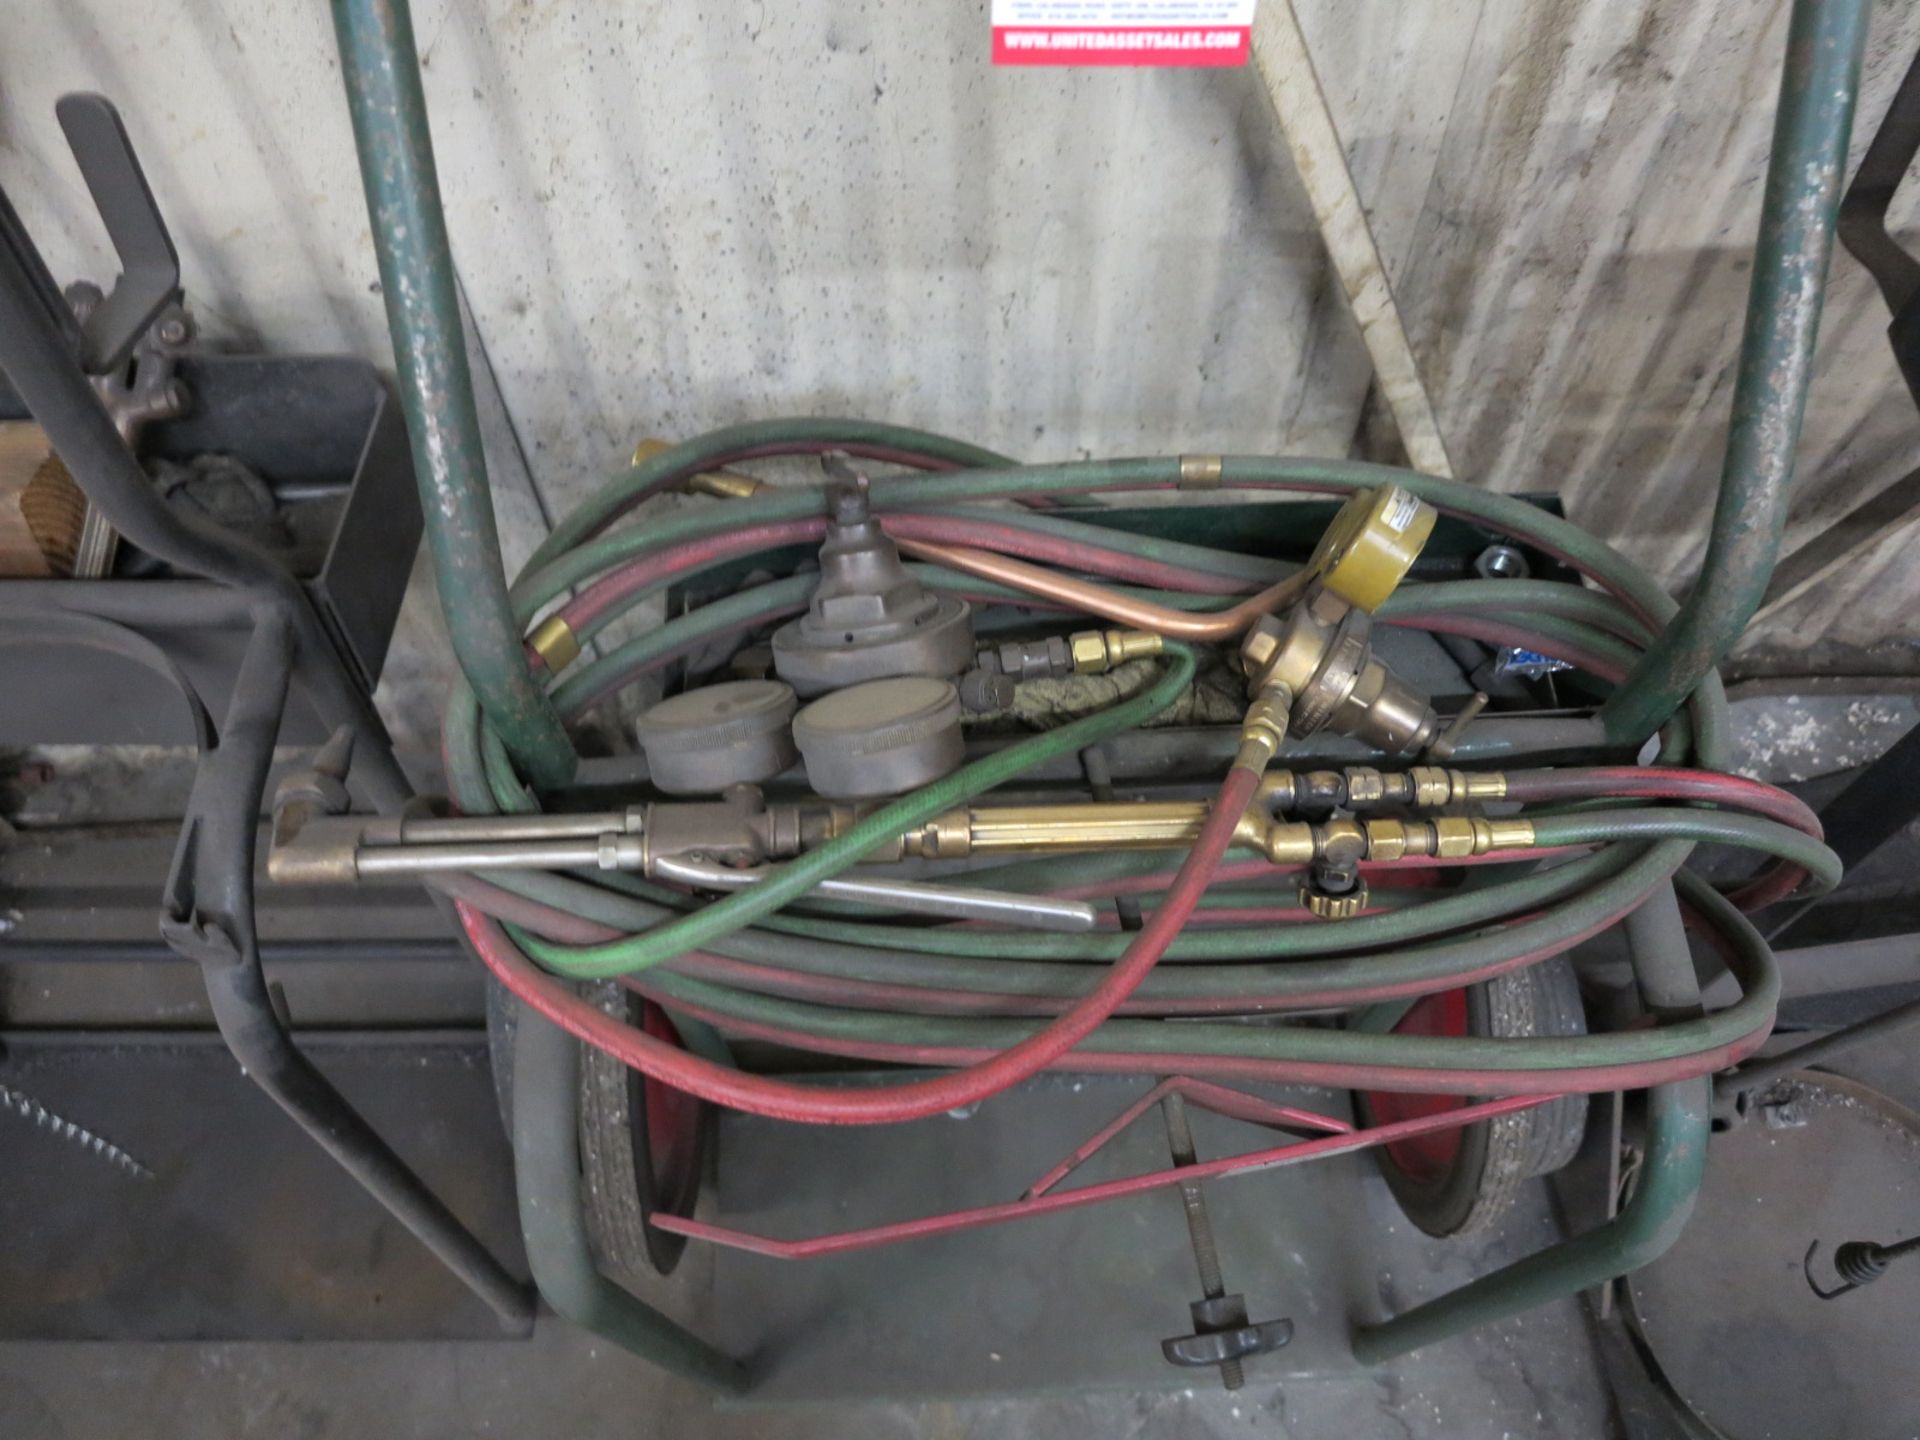 LOT - (3) OXY-ACETYLENE TORCH CARTS AND (1) TORCH W/ REGULATOR SET; NO TANKS INCLUDED - Image 2 of 2